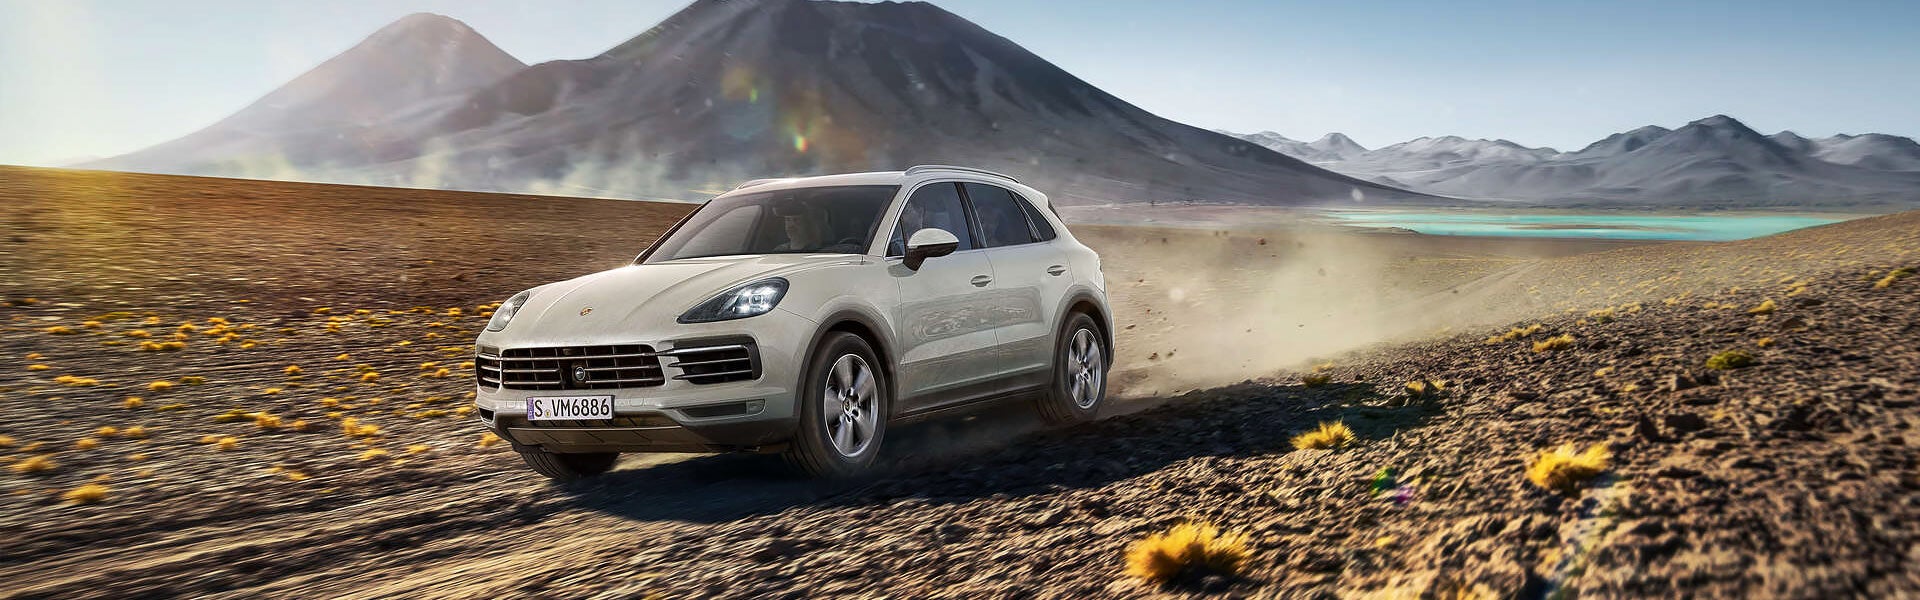 Porsche Cayenne driving on a road in dessert with mountains in the background